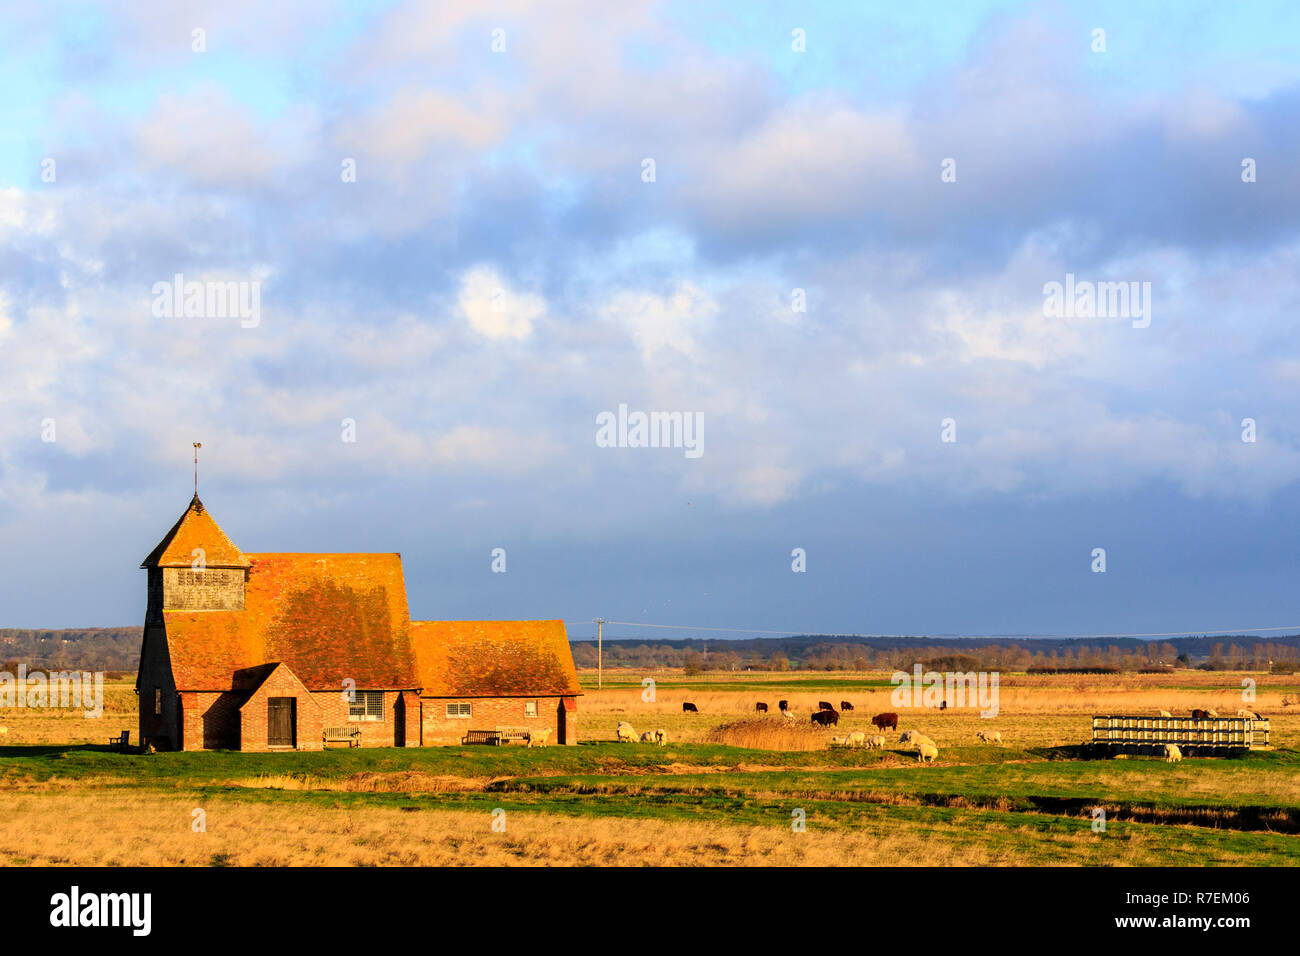 Romney Marsh with the old church on the Marsh, St Thomas Becket church. Distant shot, flat marshland with the church. sheep and drainage ditches. Sky cloudy and overcast but church lit by sunlight. Stock Photo